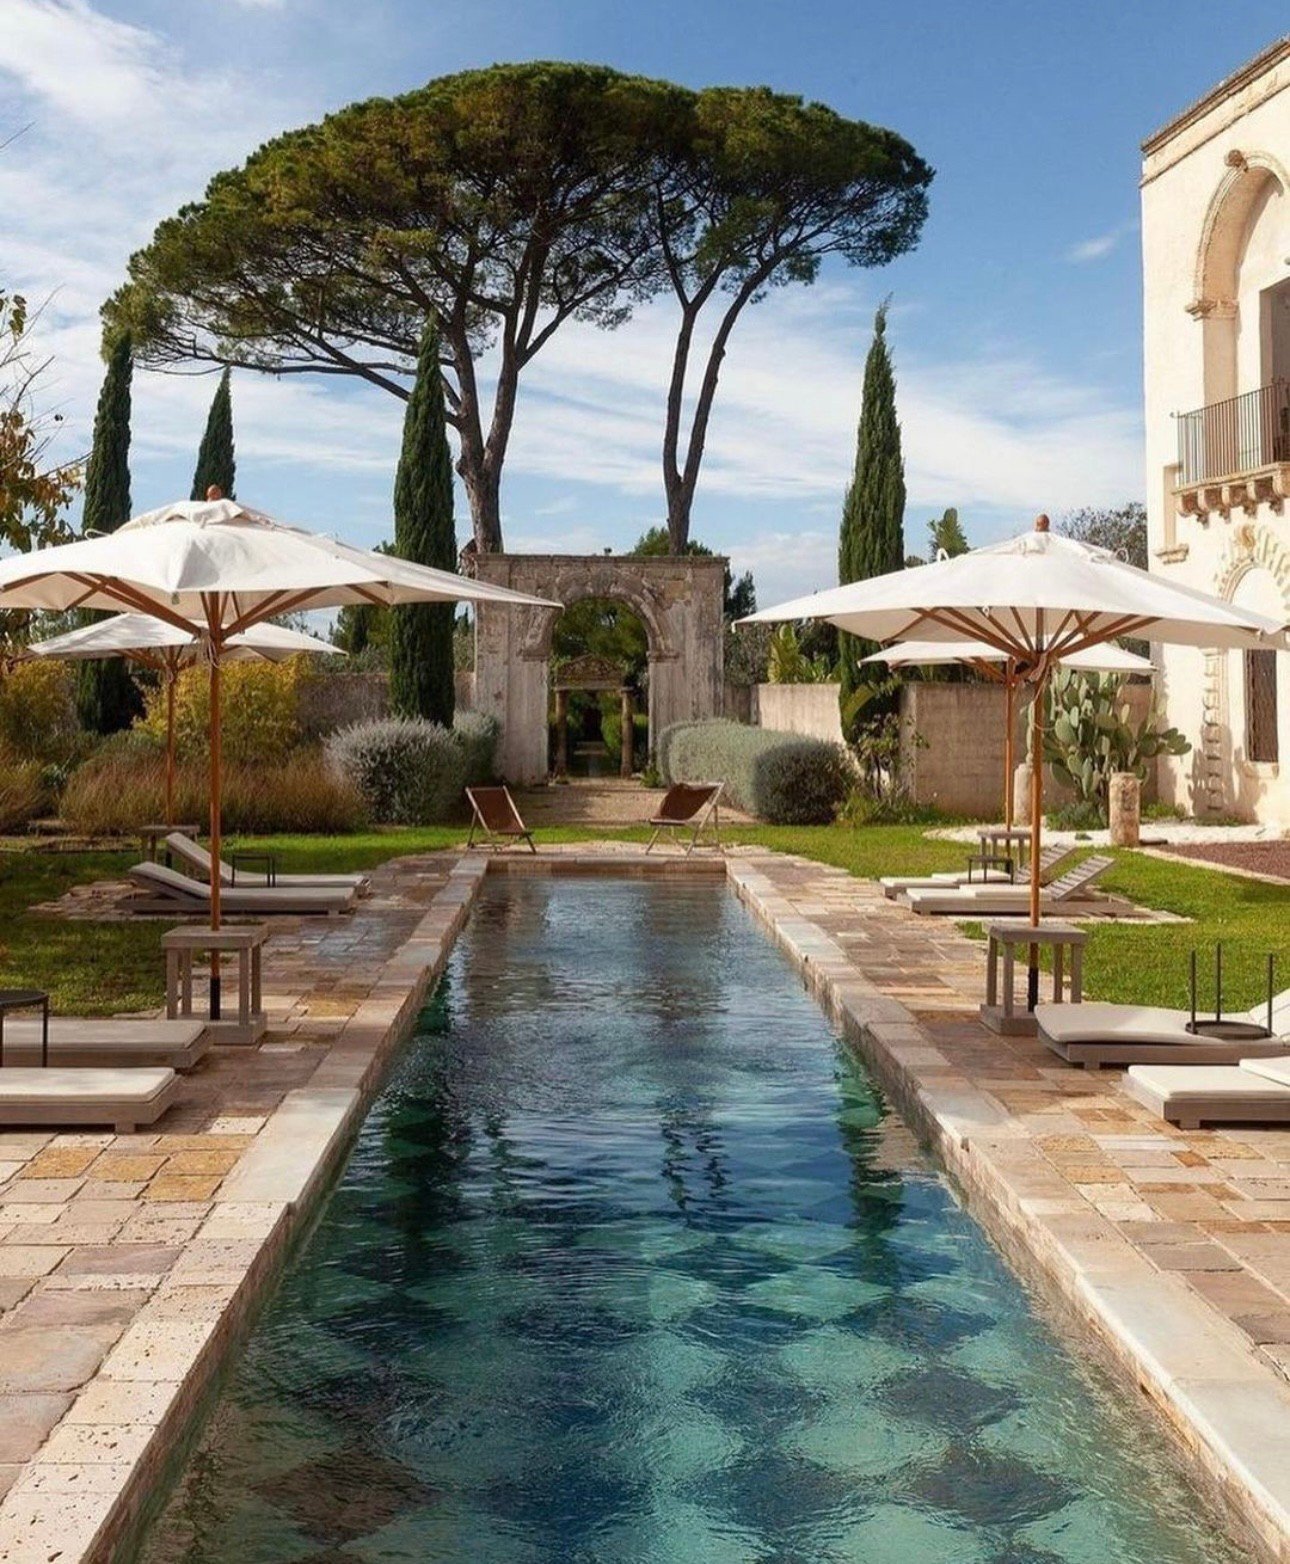 Come away with me...to a place filled with visual art. Can you hear the birds singing? The soft trickle of a water-fountain? Feel the gentle warmth of the sun as you dip toes into a cool poolside oasis? Especially in a place like this, beauty is an e